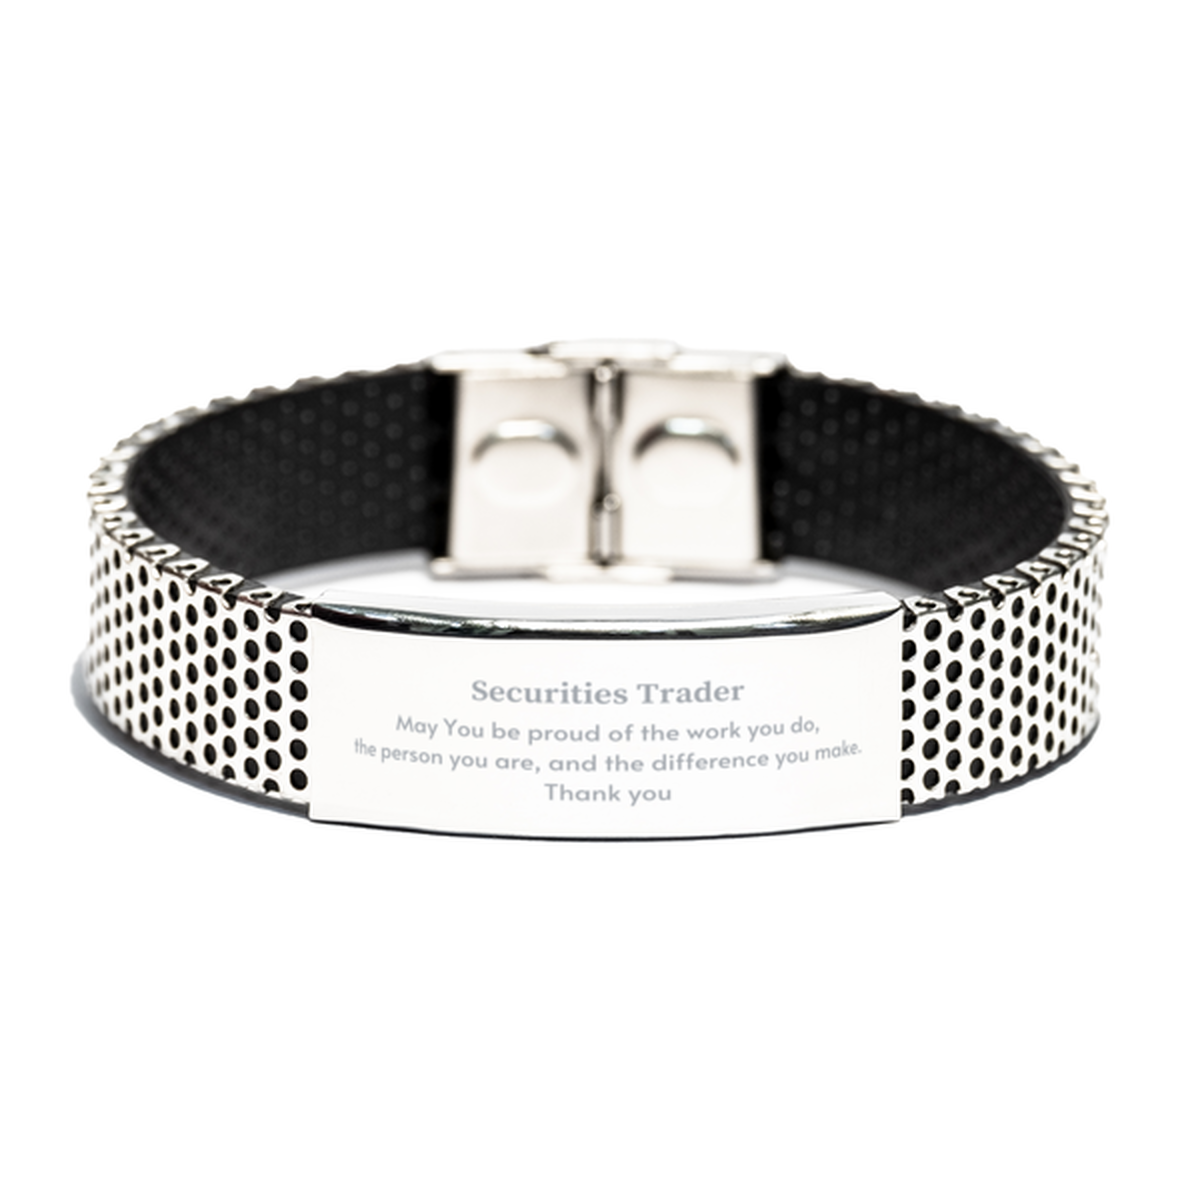 Heartwarming Stainless Steel Bracelet Retirement Coworkers Gifts for Securities Trader, Securities Trader May You be proud of the work you do, the person you are Gifts for Boss Men Women Friends